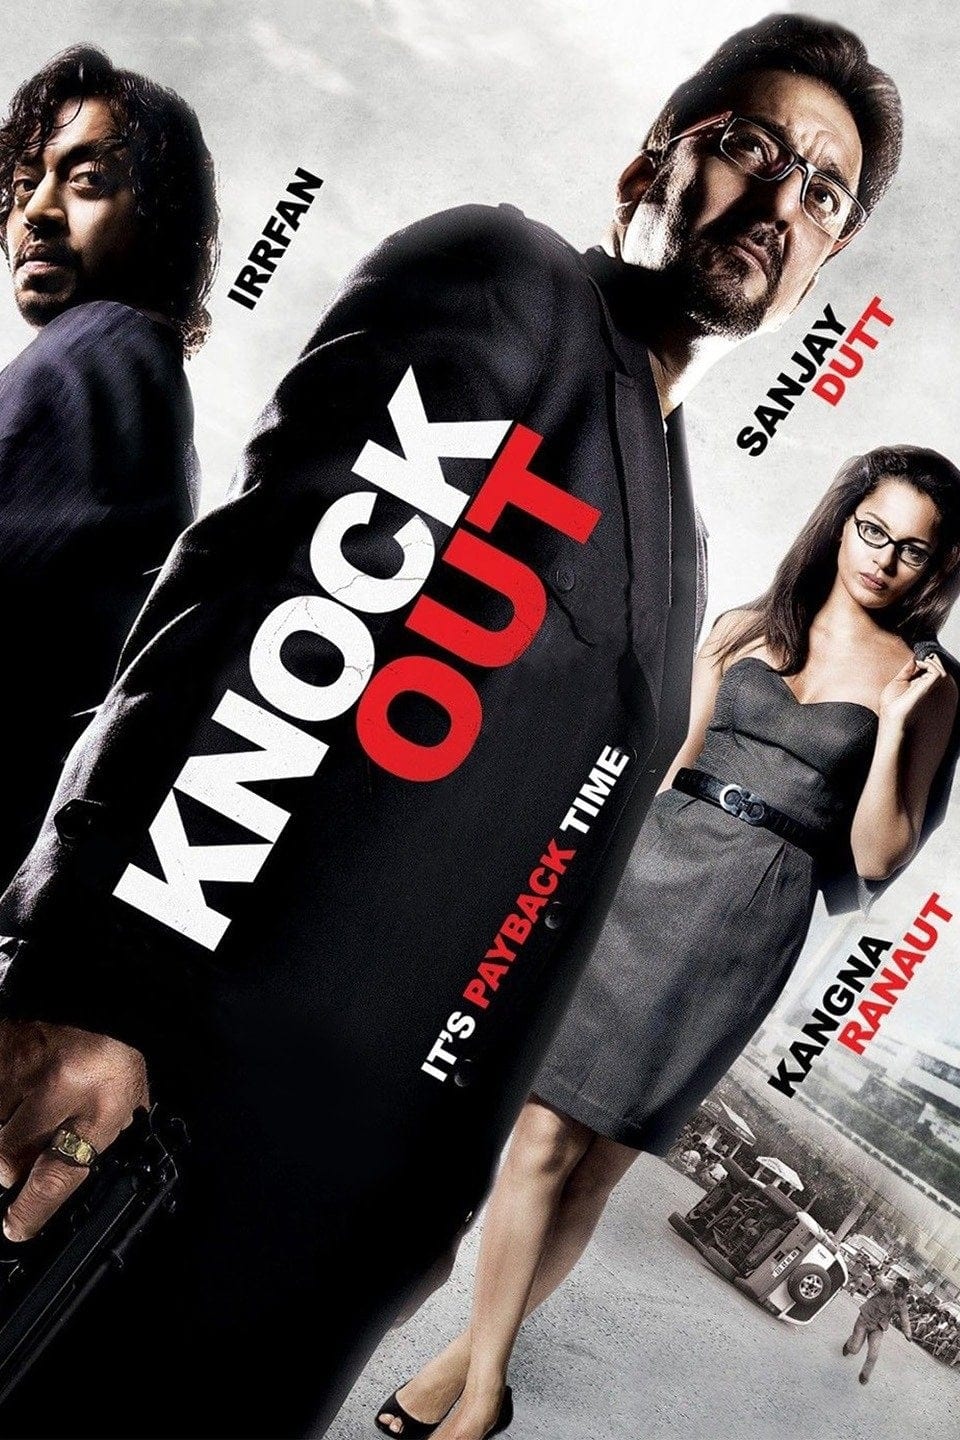 Poster for the movie "Knock Out"